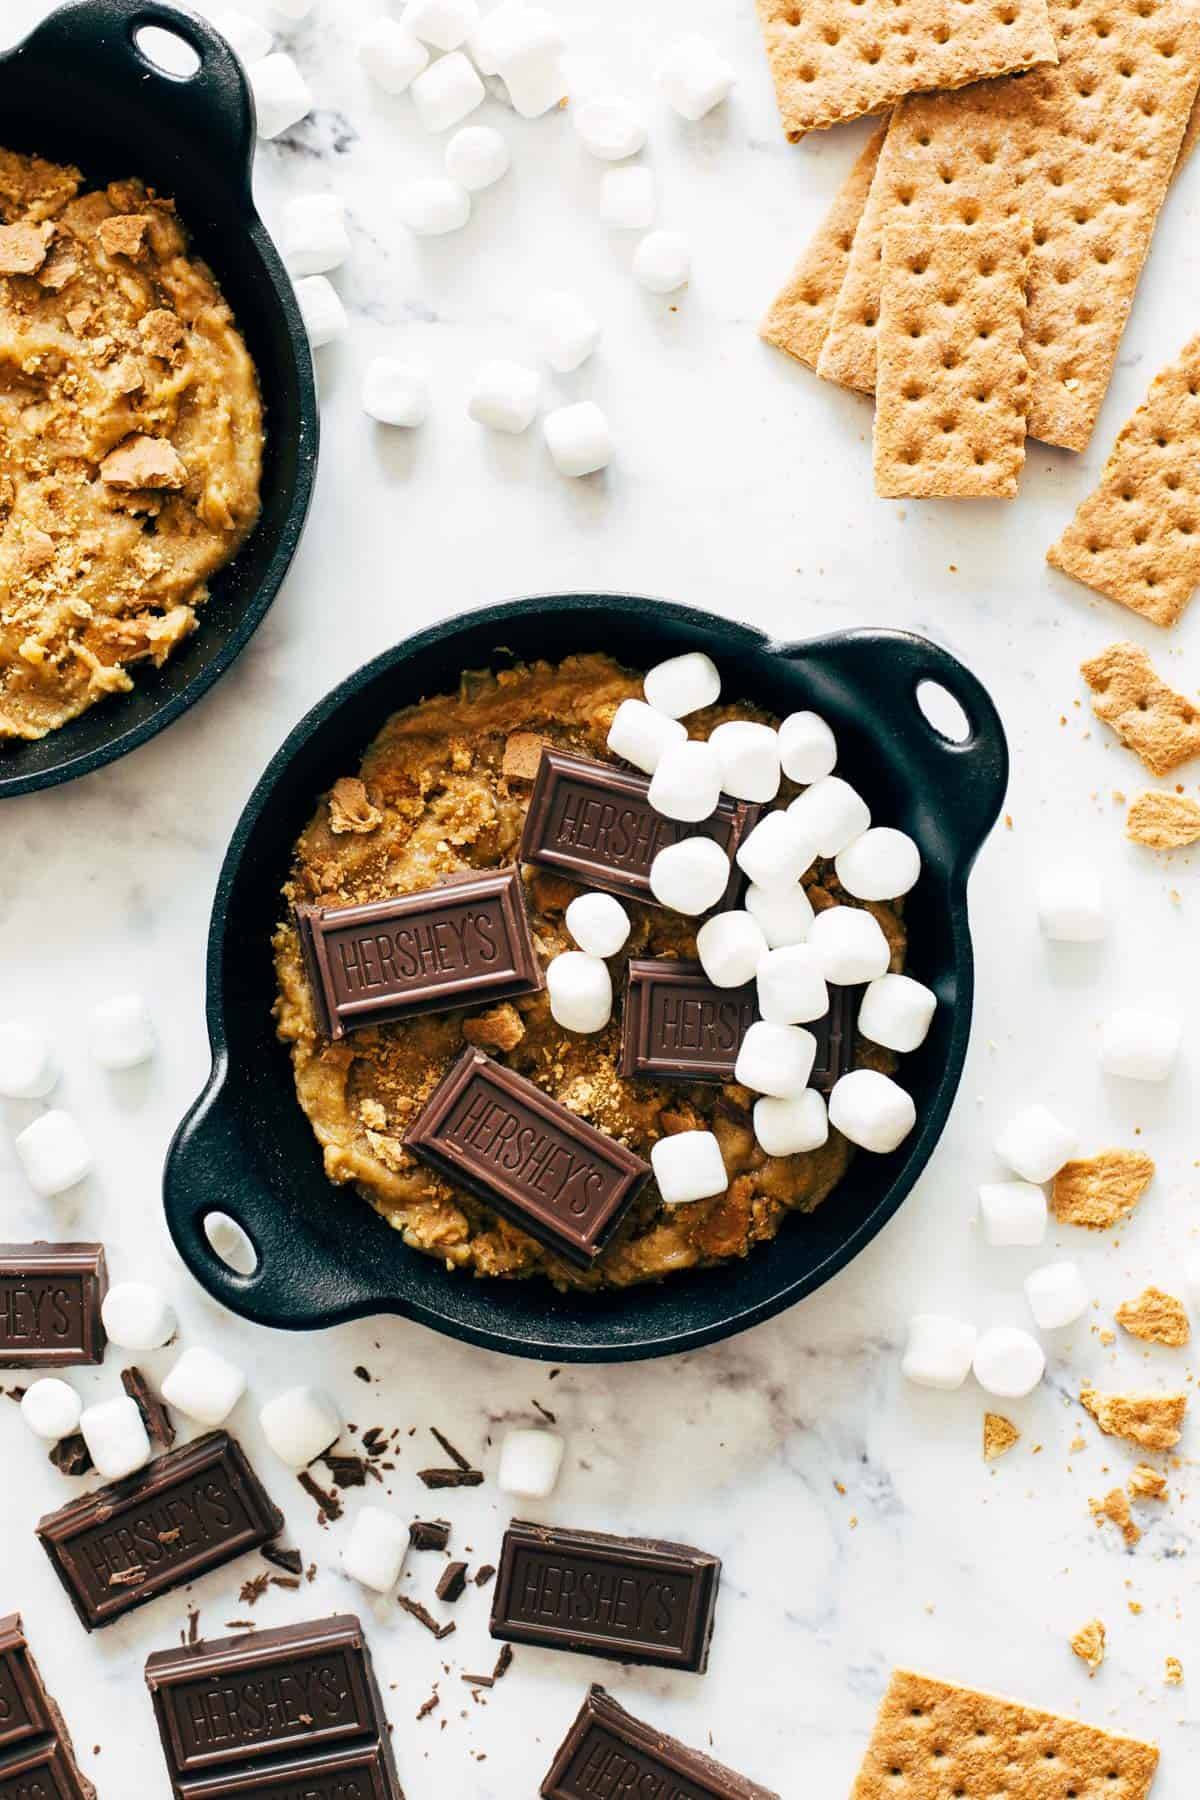 S'mores bowls before baking.